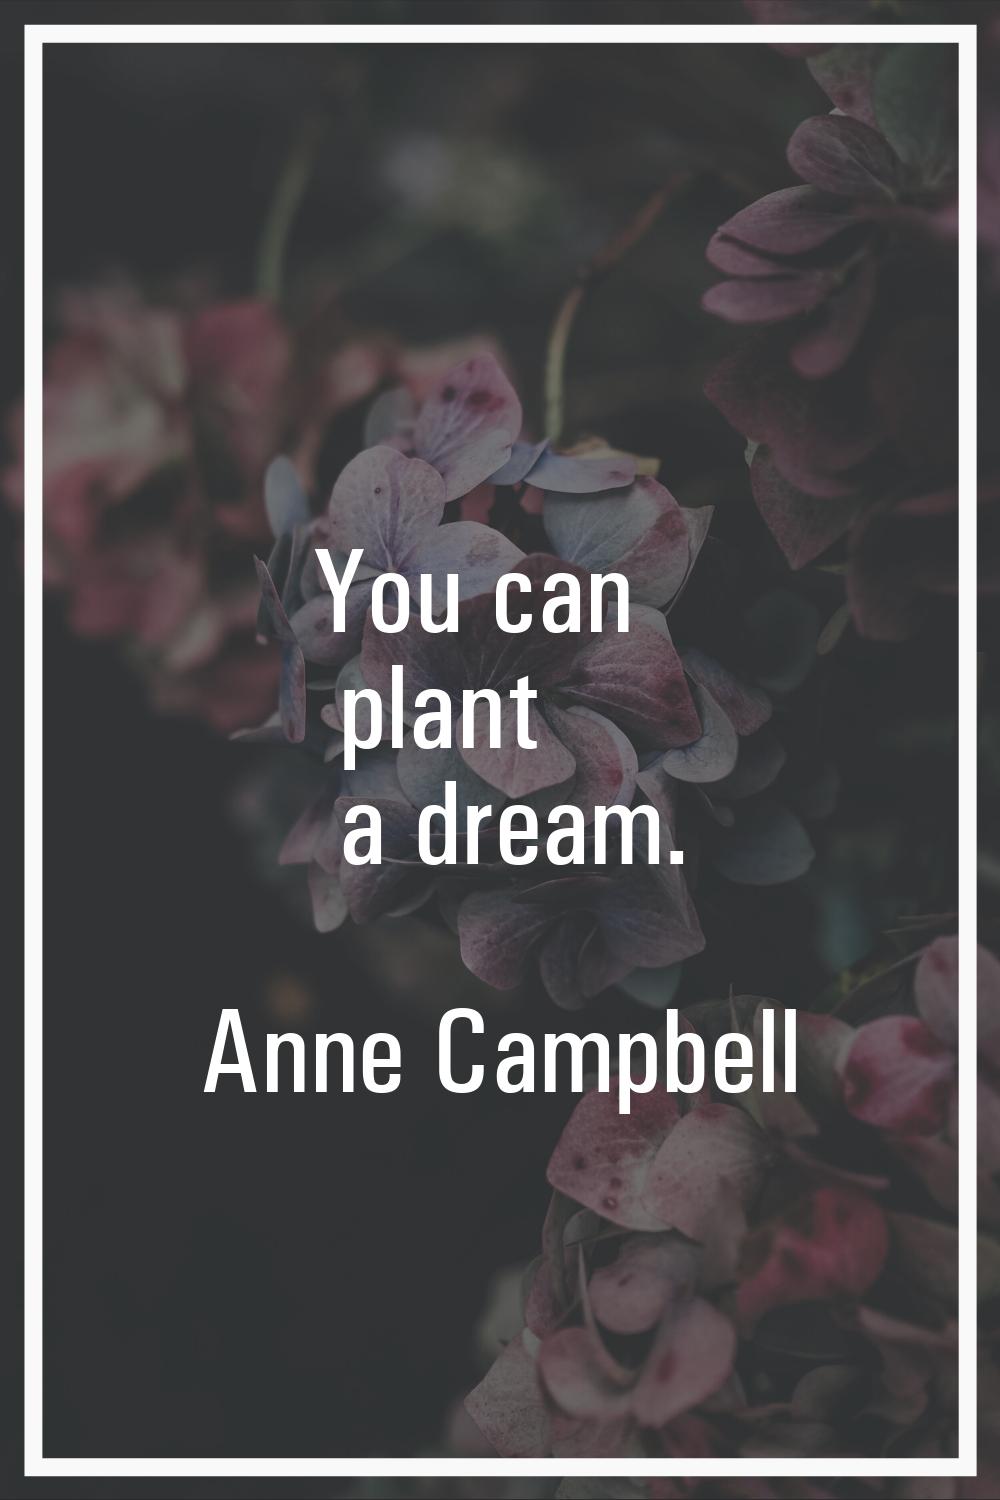 You can plant a dream.